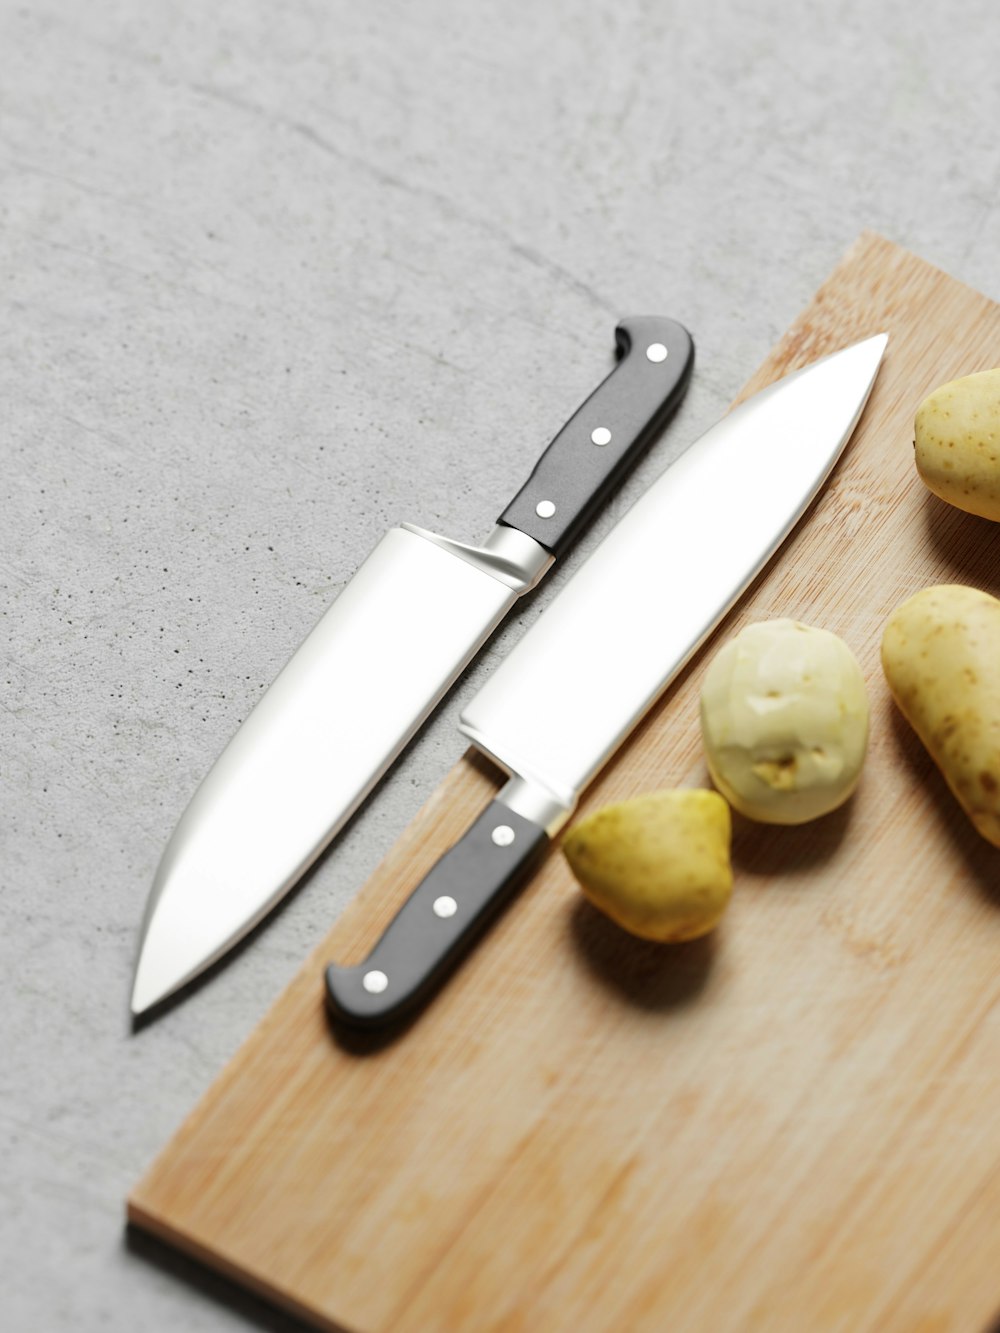 potatoes and a knife on a cutting board